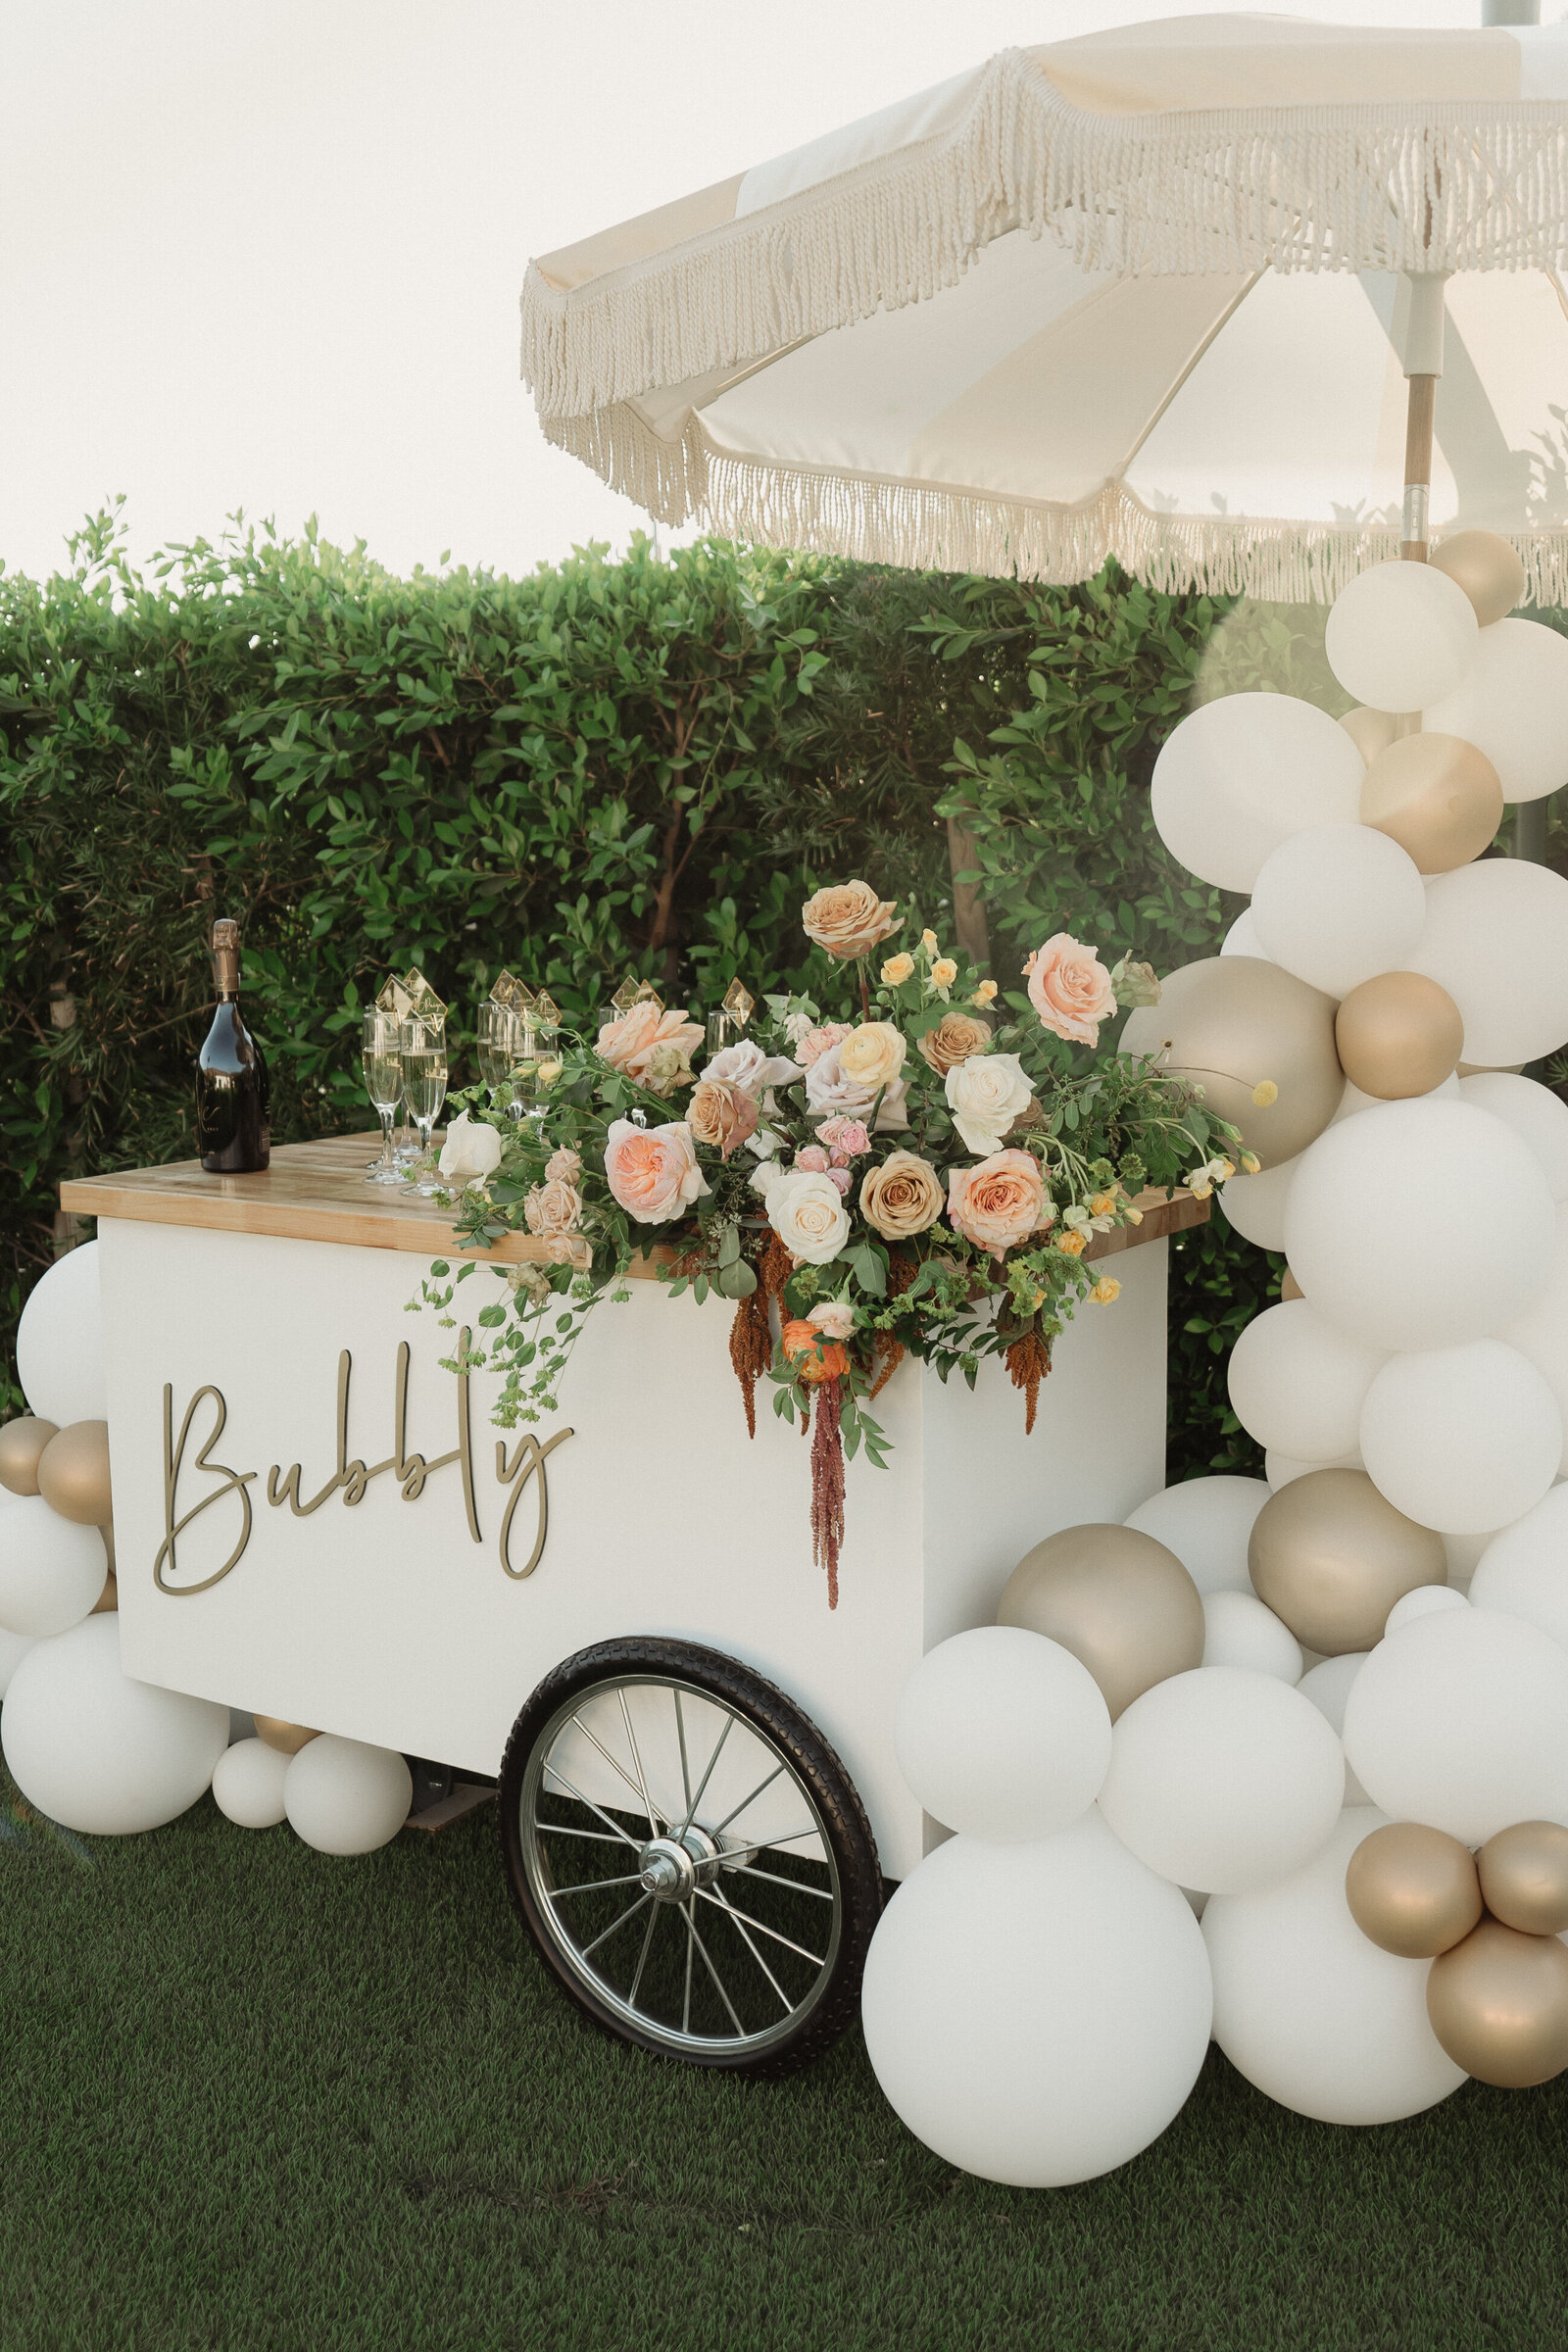 Flowers help this small champagne cart stand out at a wedding.